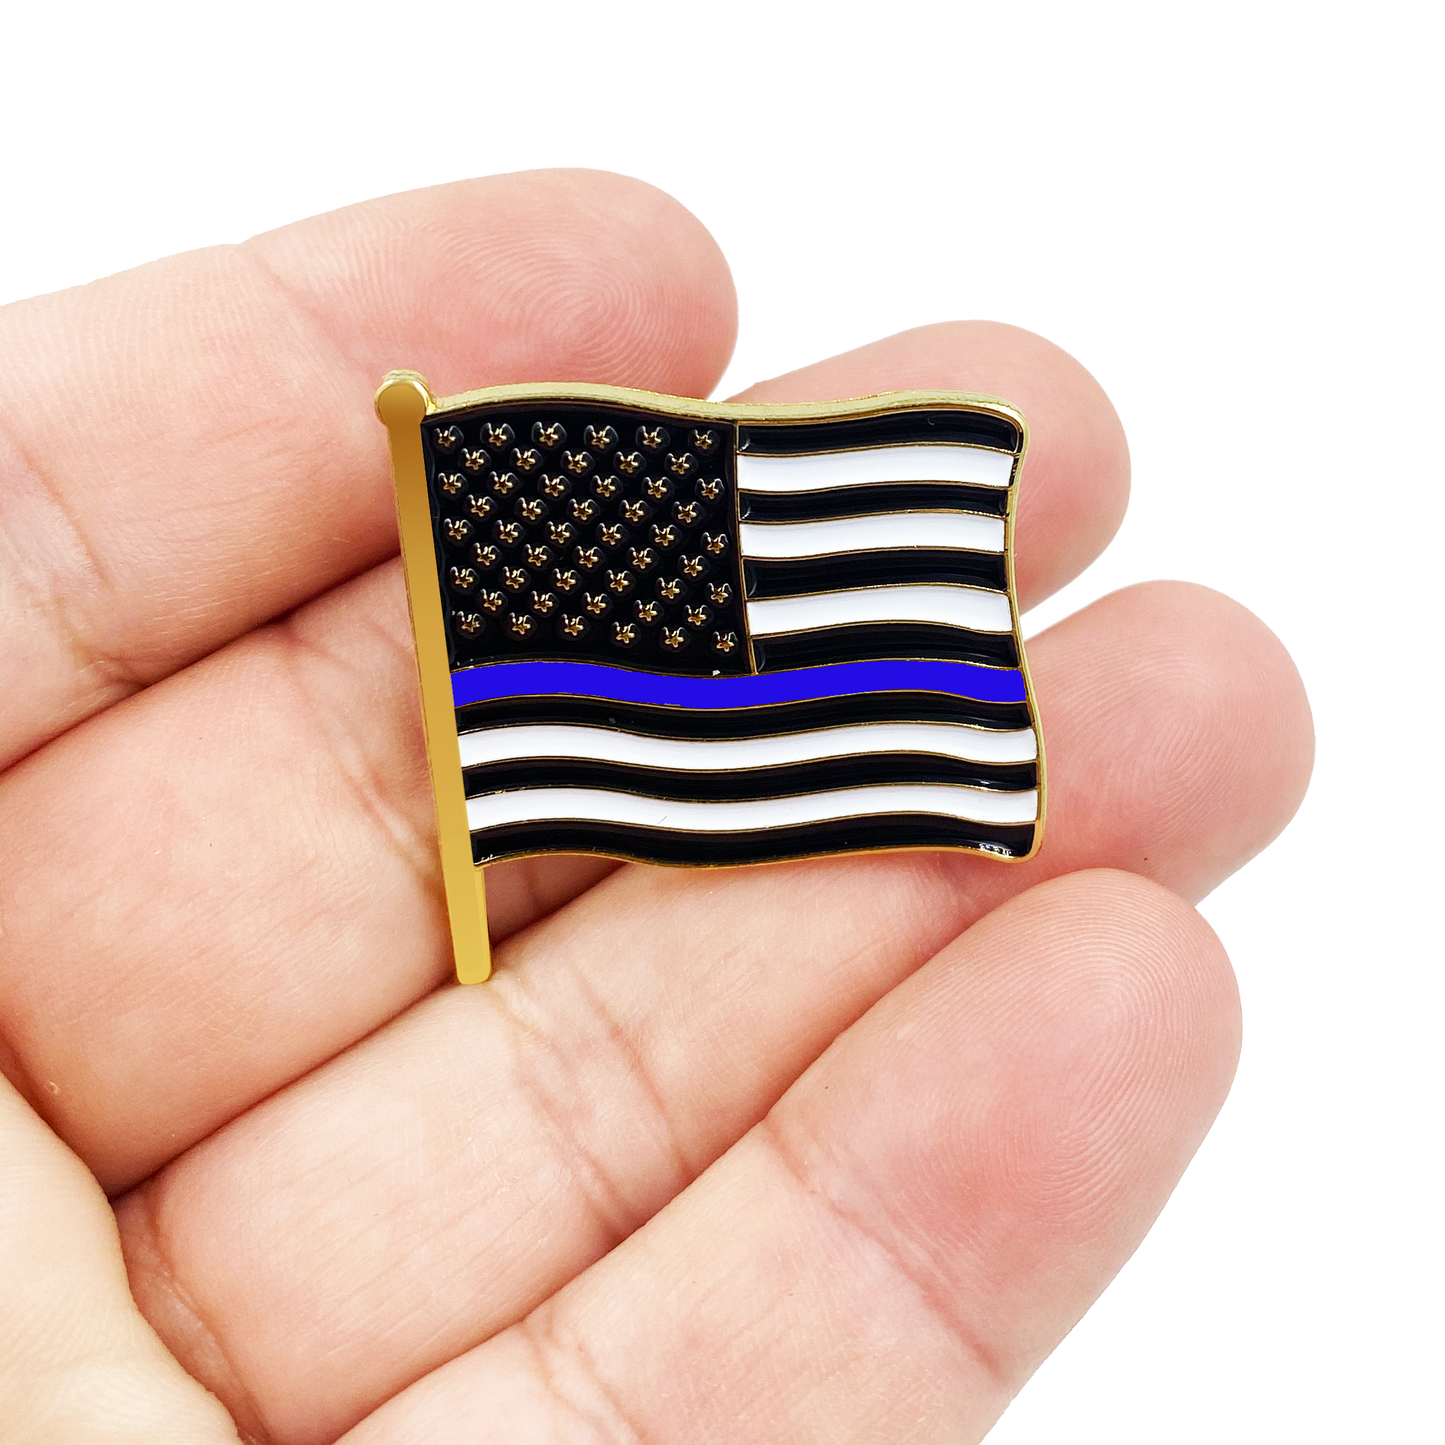 EL14-001 Thin Blue Line Police Department American Waving Flag Lapel Pin 1.25" with 2 pin posts and deluxe clasps, U.S. Stars are Stripes, Old Glory US USA Back The Blue